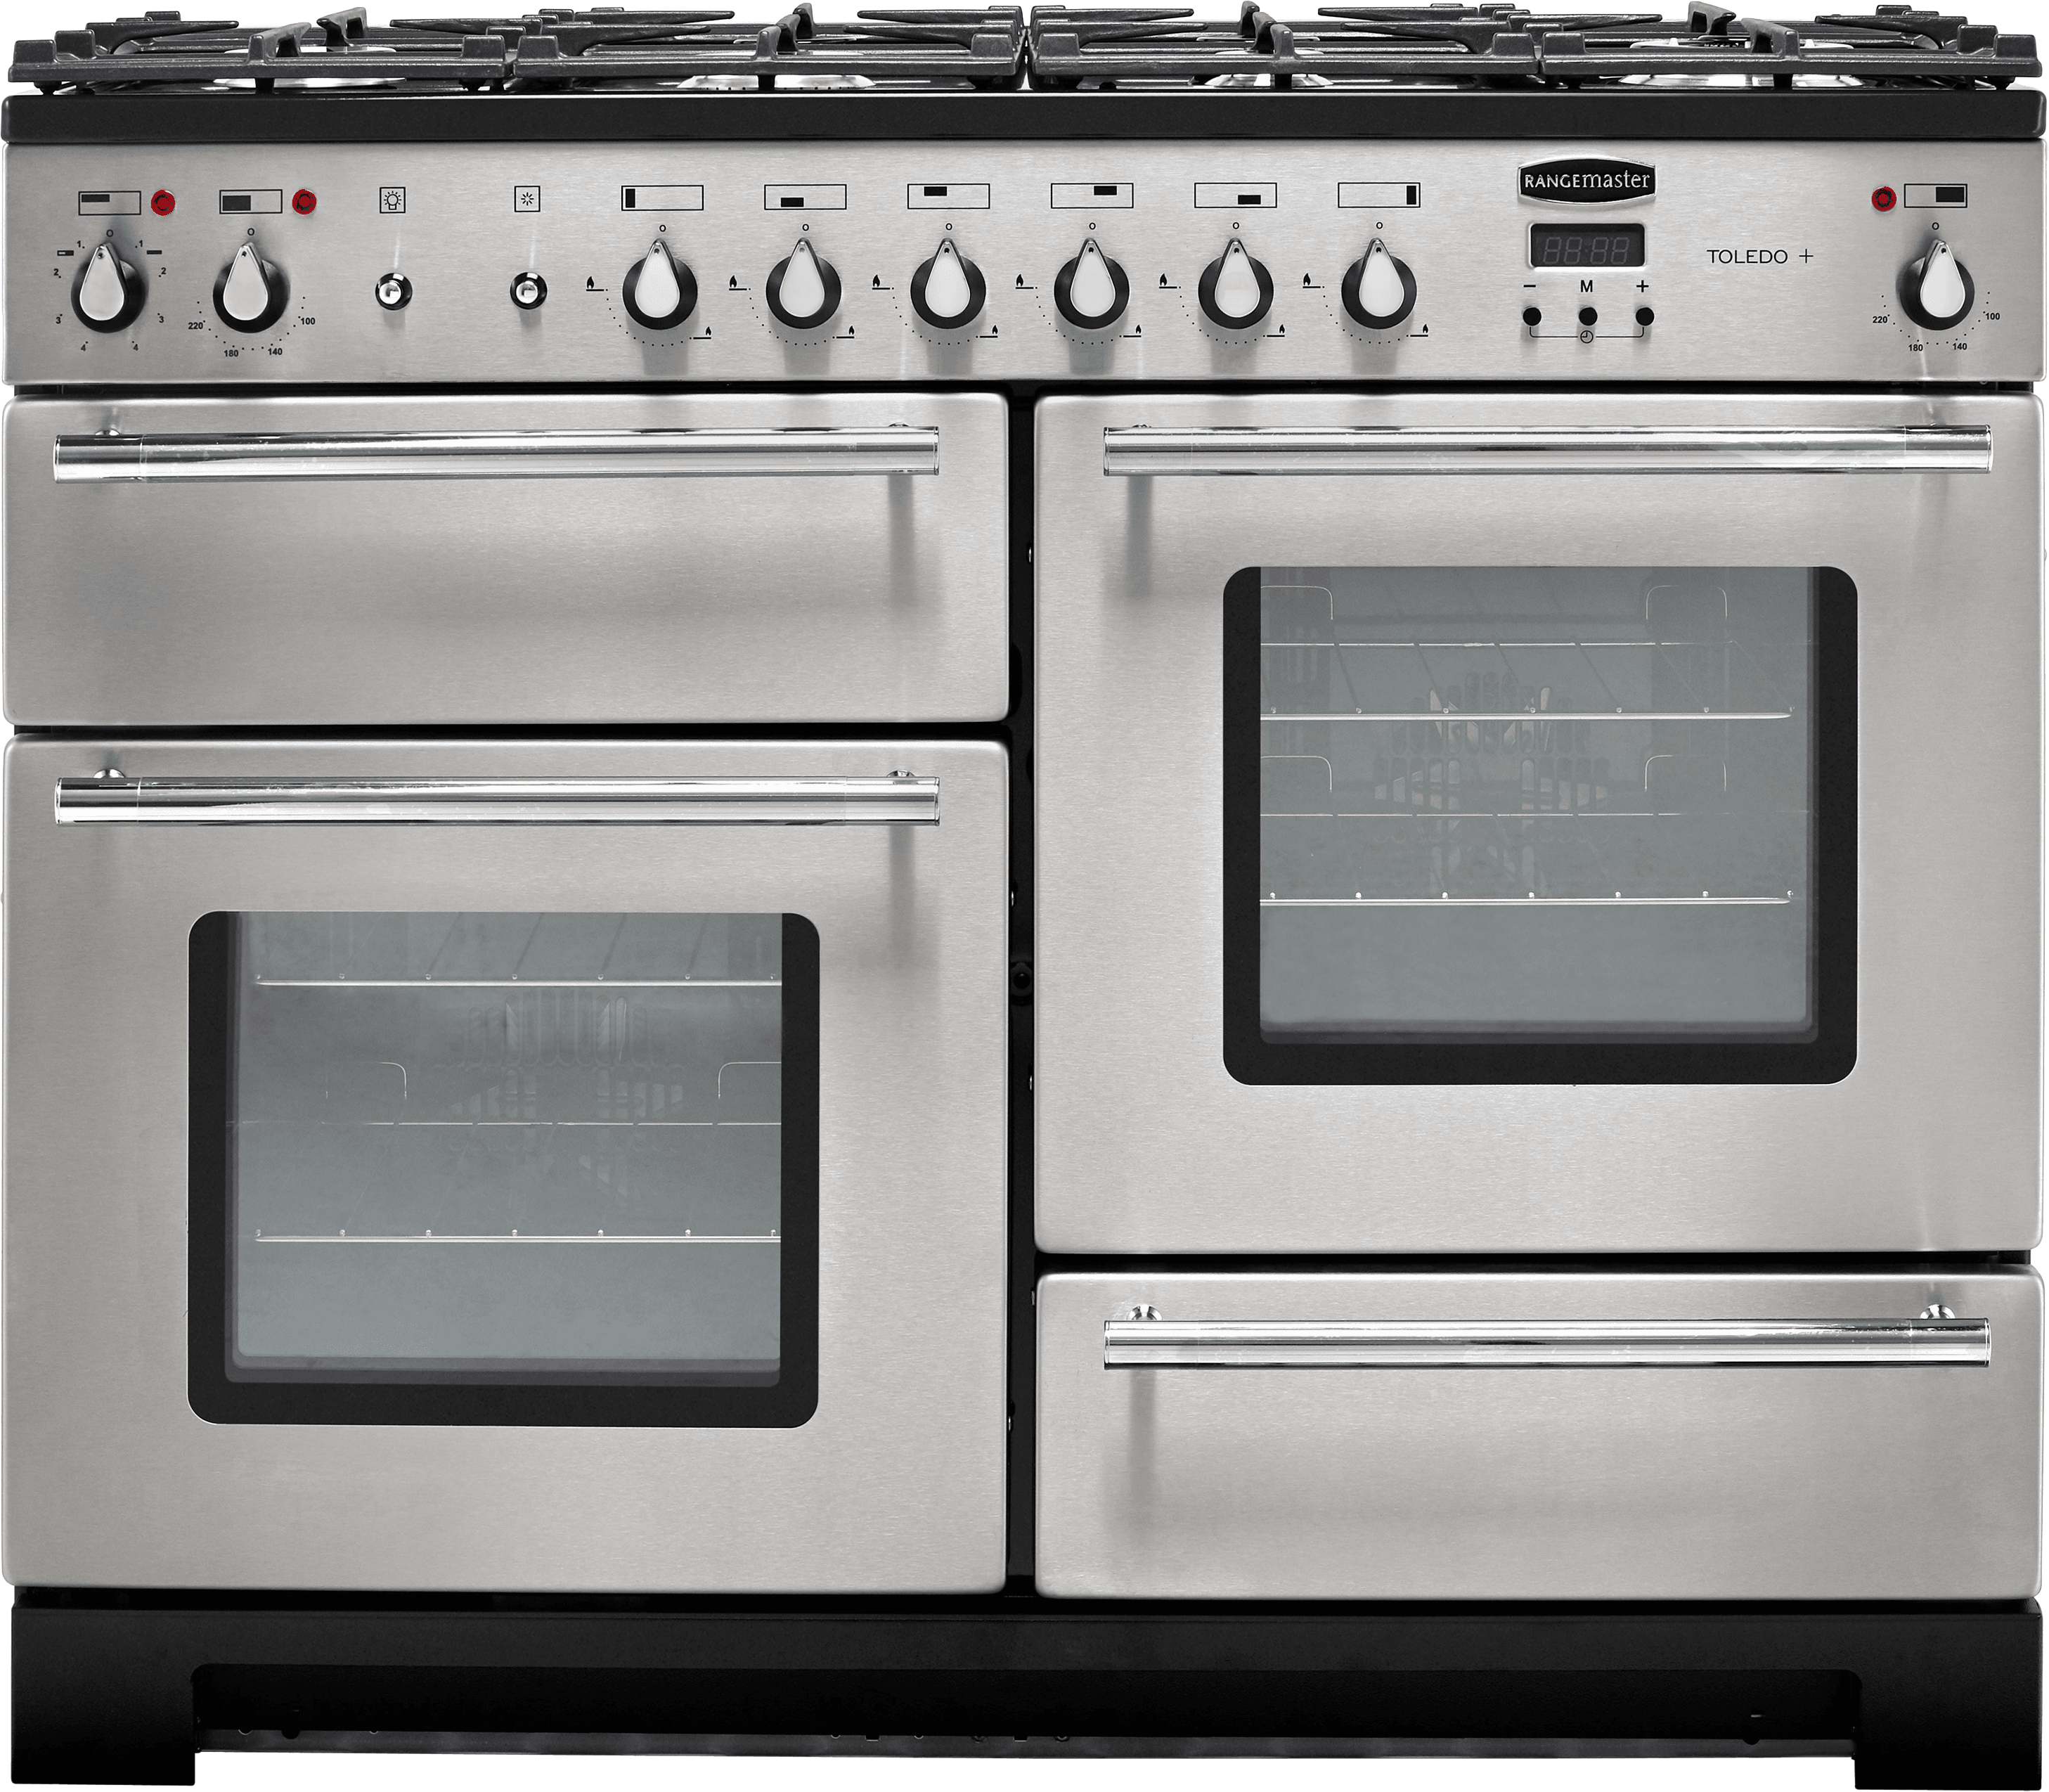 Rangemaster Toledo + TOLP110DFFSS/C 110cm Dual Fuel Range Cooker - Stainless Steel / Chrome - A/A Rated, Stainless Steel